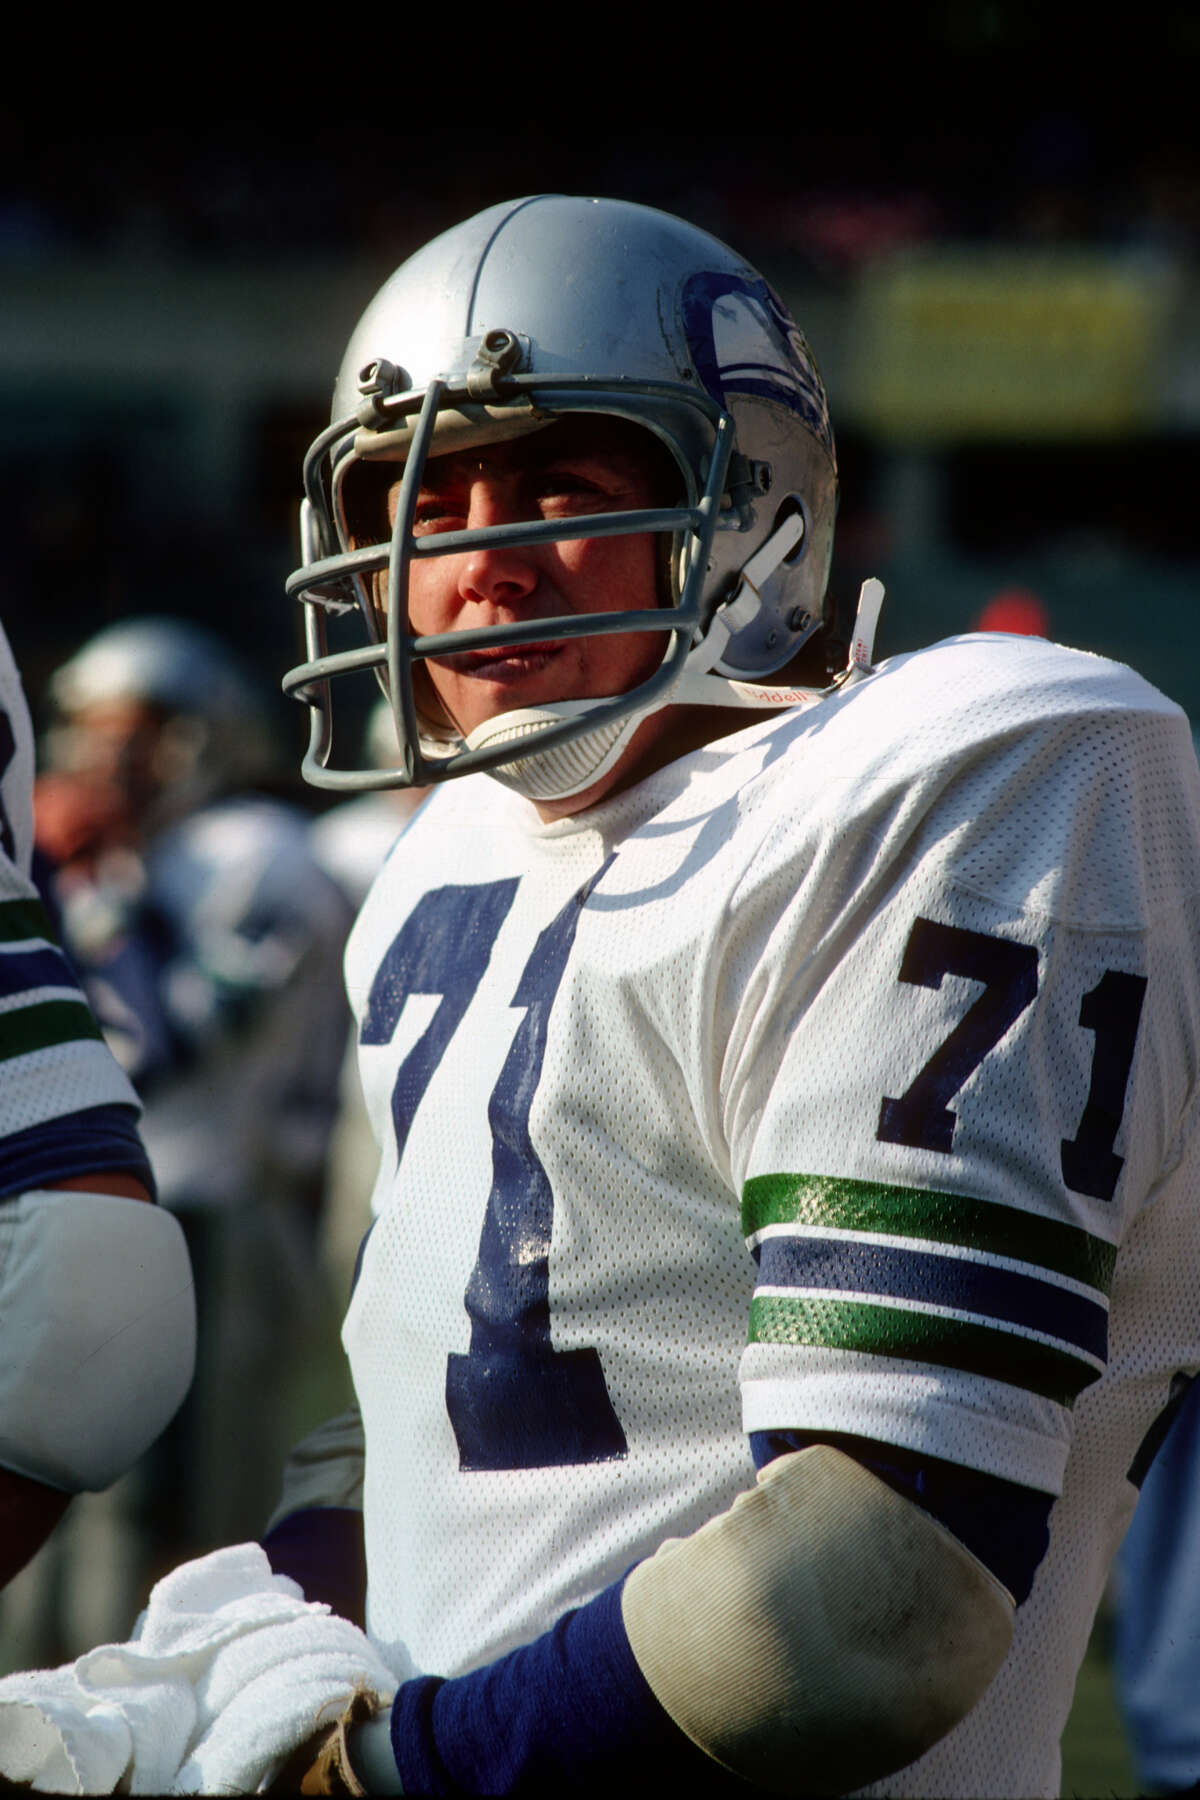 Seahawks select Steve Niehaus No. 2 overall in 1976  Steve Niehaus was the first draft pick in Seahawks history, but fans in Seattle will always be left with ‘what if’ questions. After starting all 14 games as a rookie, and registering 9.5 sacks en route to NFC Defensive Rookie of the Year honors, the rest of his career was derailed by injuries. He’d play just three more seasons before hanging it up.  What adds to the hurt? The Buccaneers landed a future Hall of Famer in Lee Roy Selmon at No. 1, a pick ahead Niehaus. And NFL greats like Mike Haynes (also a Hall of Famer) and Chuck Muncie (three-time Pro Bowler) were selected after Niehaus.